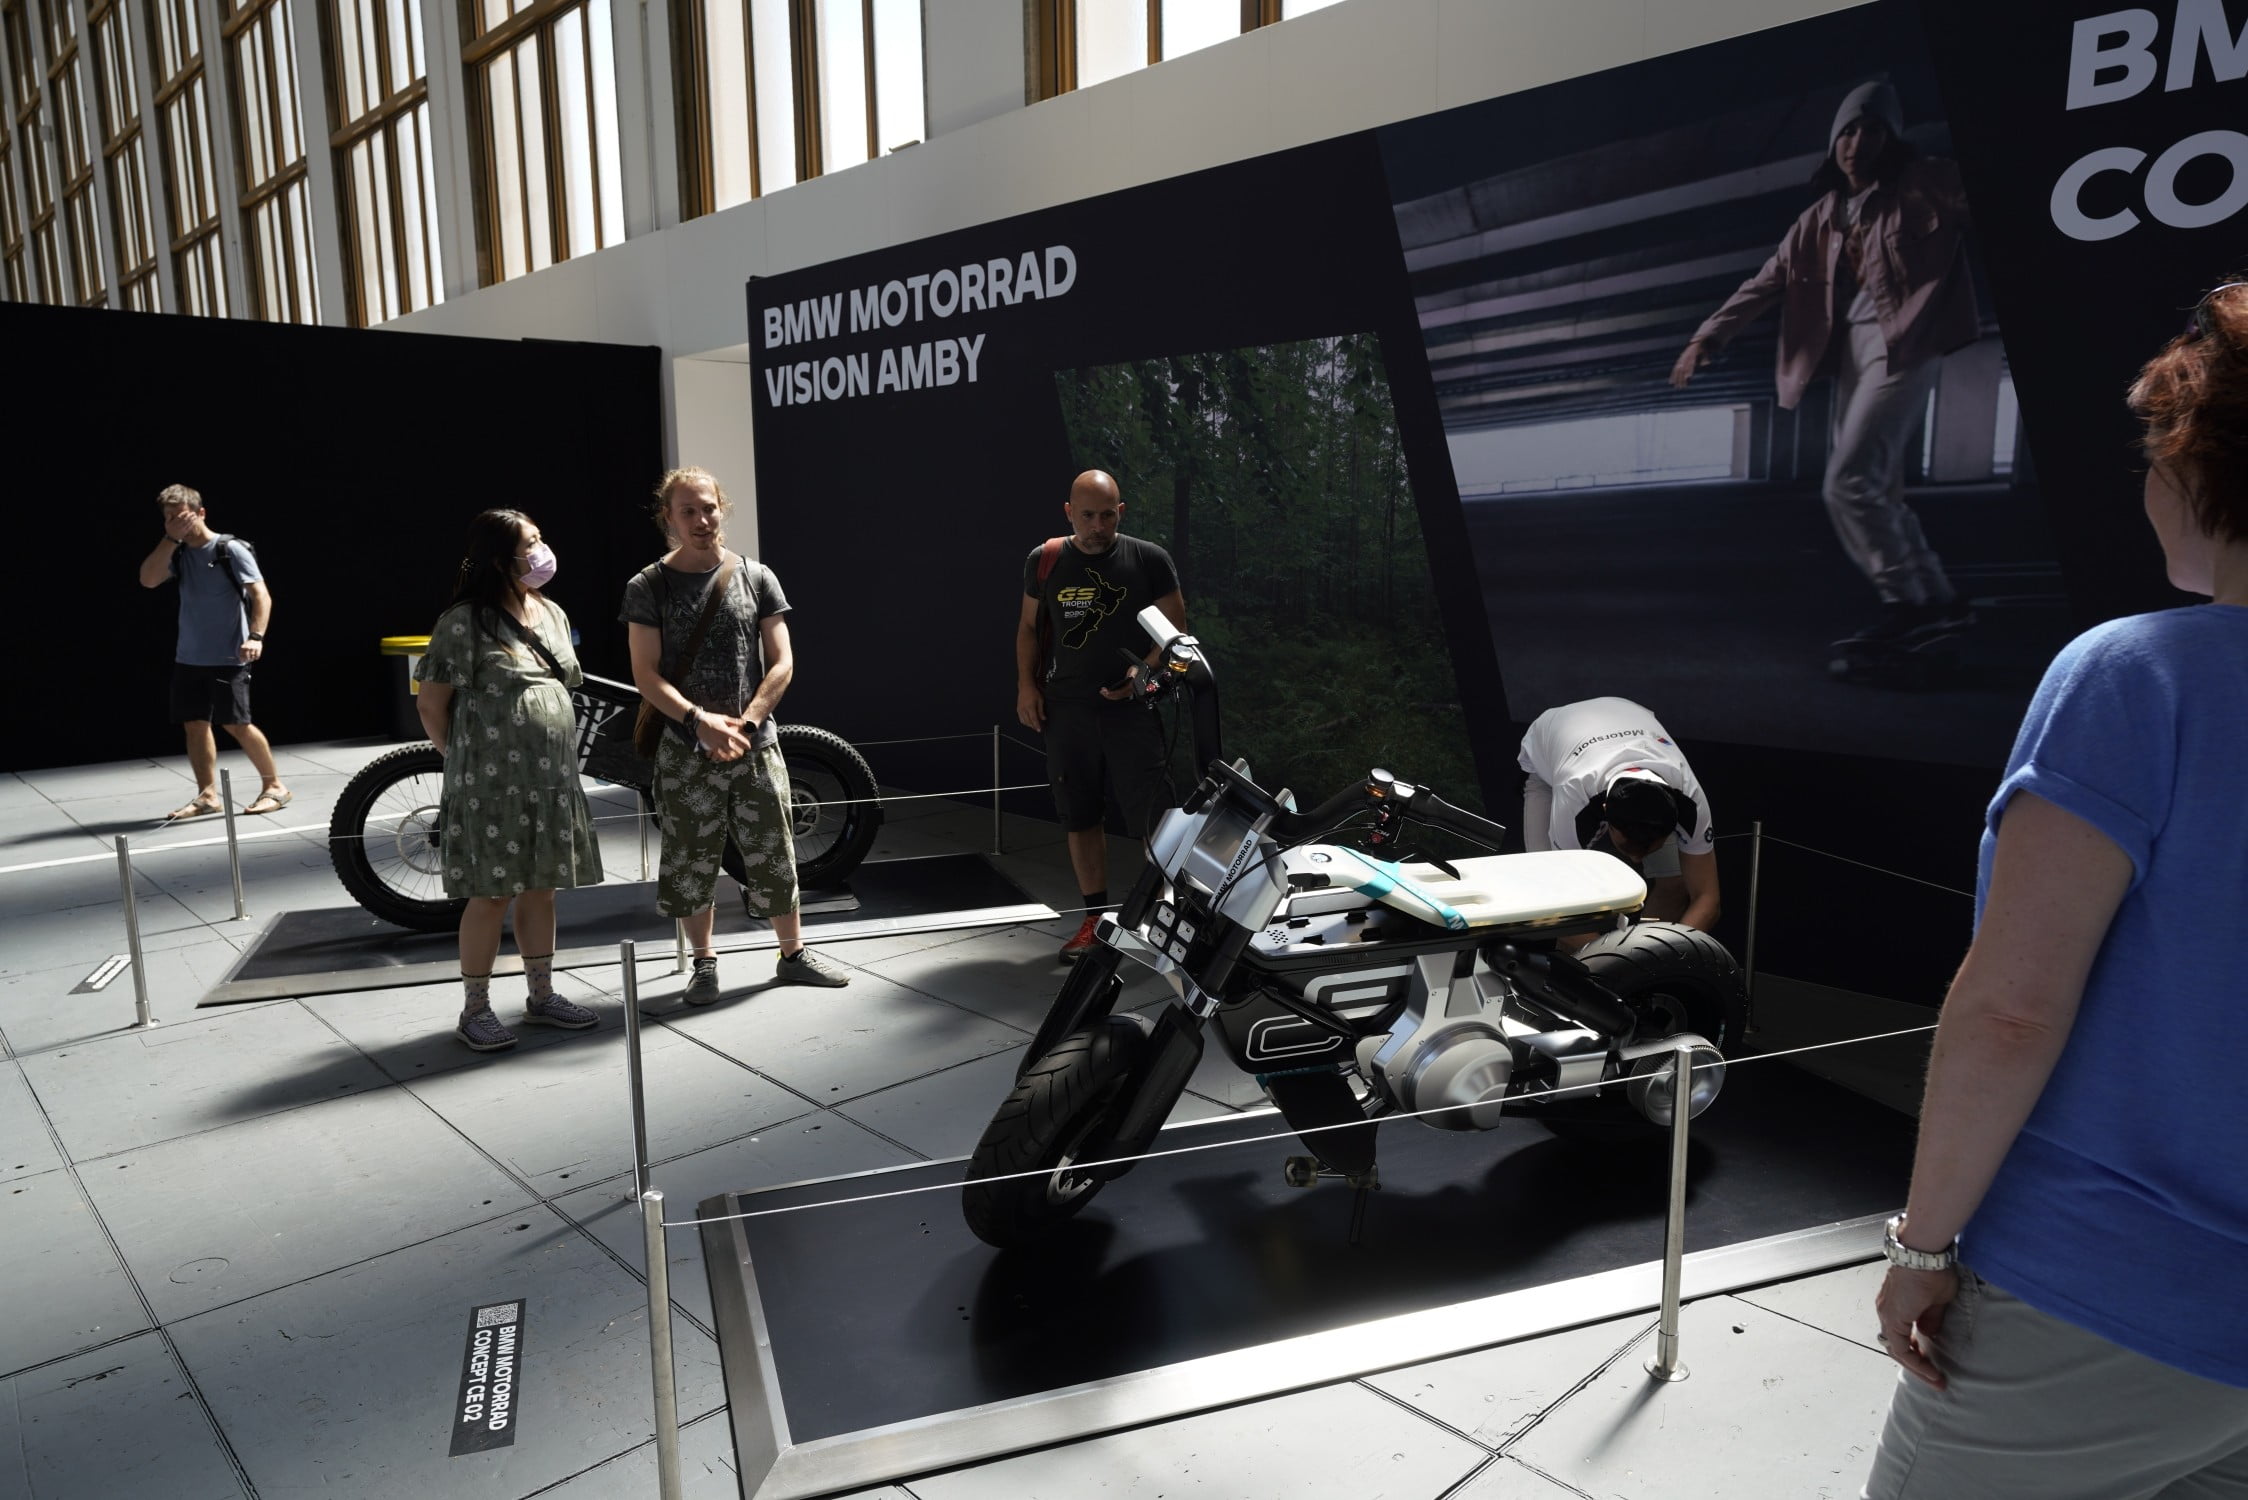 BMW Motorrad weekend in Berlin: Pure&Crafted Festival (July 1, 2022) and BMW Motorrad Days (July 2&3, 2022)